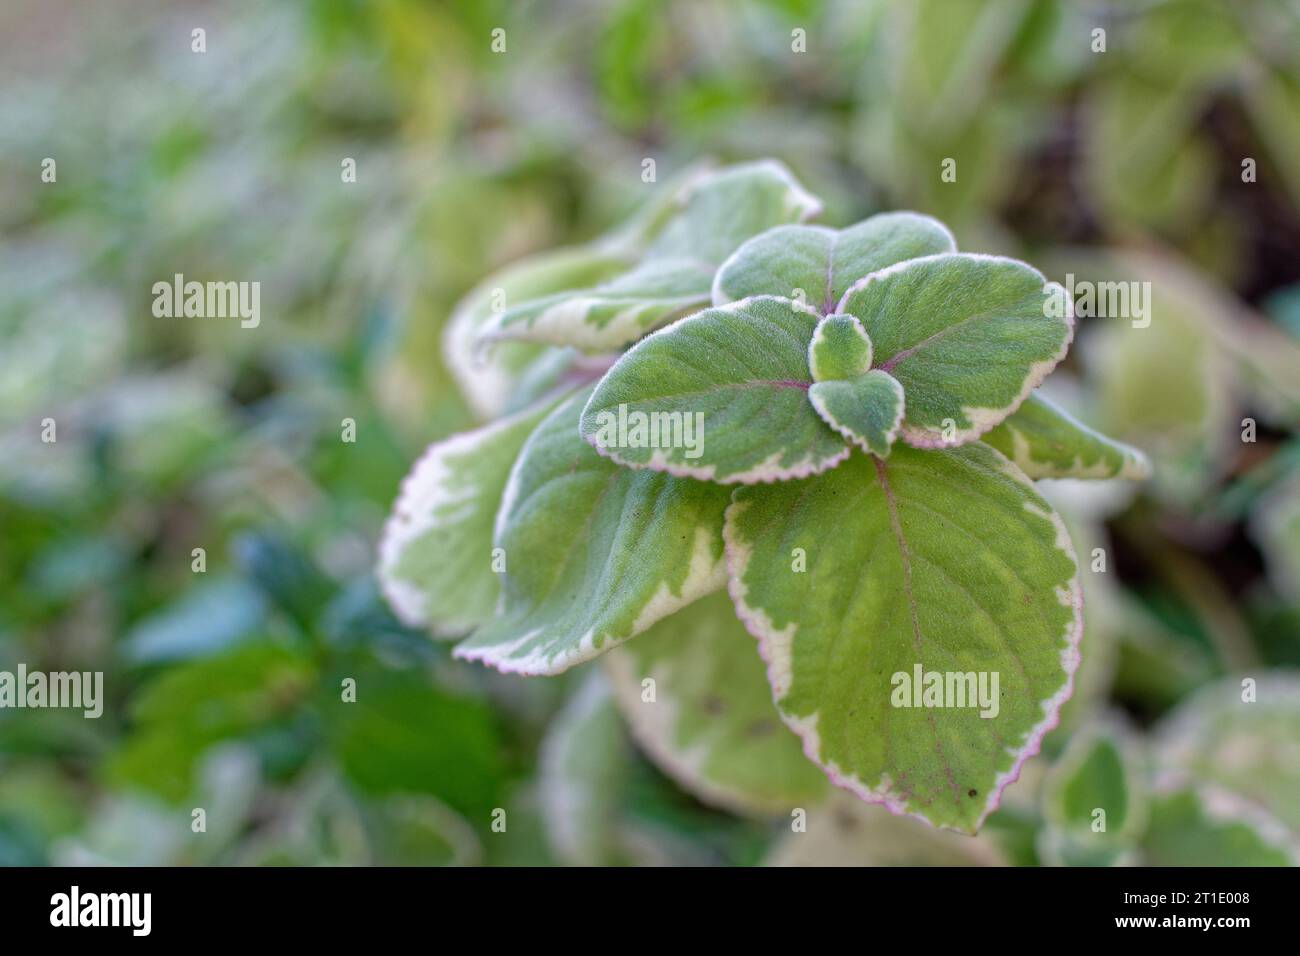 French Polynesia: Cuban oregano (plectranthus amboinicus), perennial plant from tropical climates, from the Lamiaceae family, used for its fragrance r Stock Photo